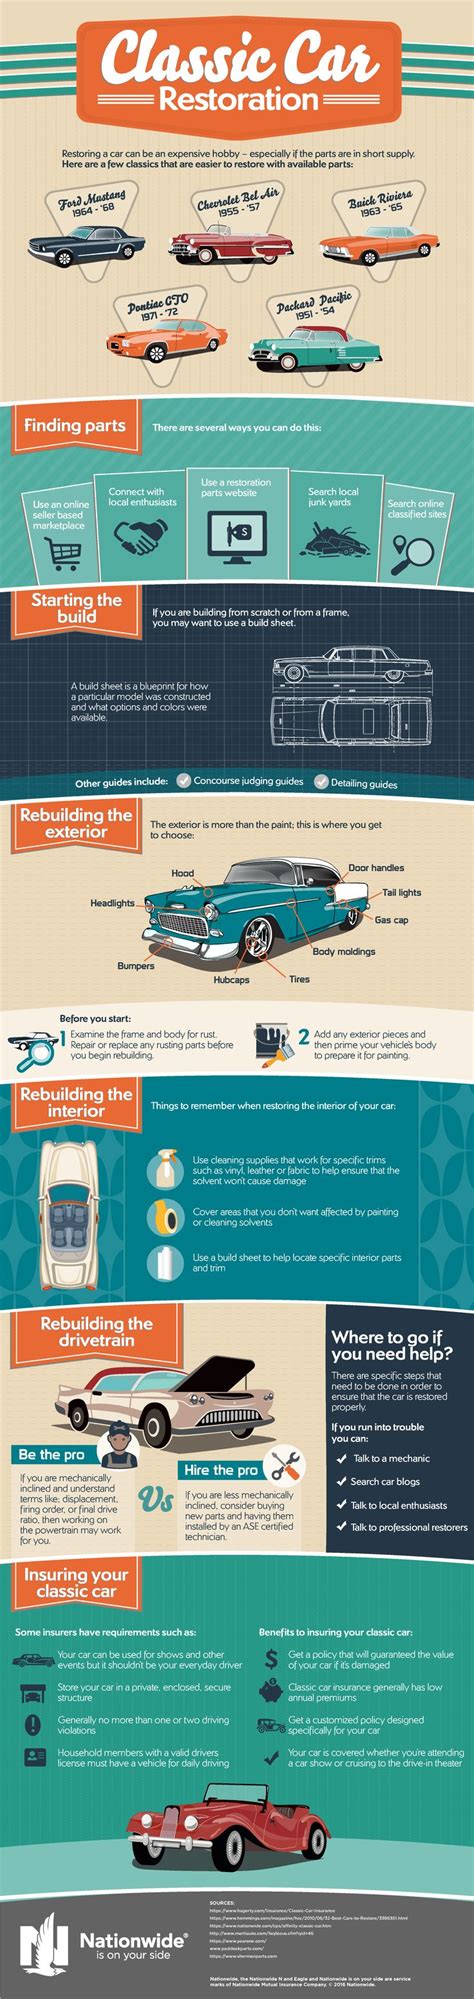 Classic Car Restoration How To Restore A Classic Car Infographic